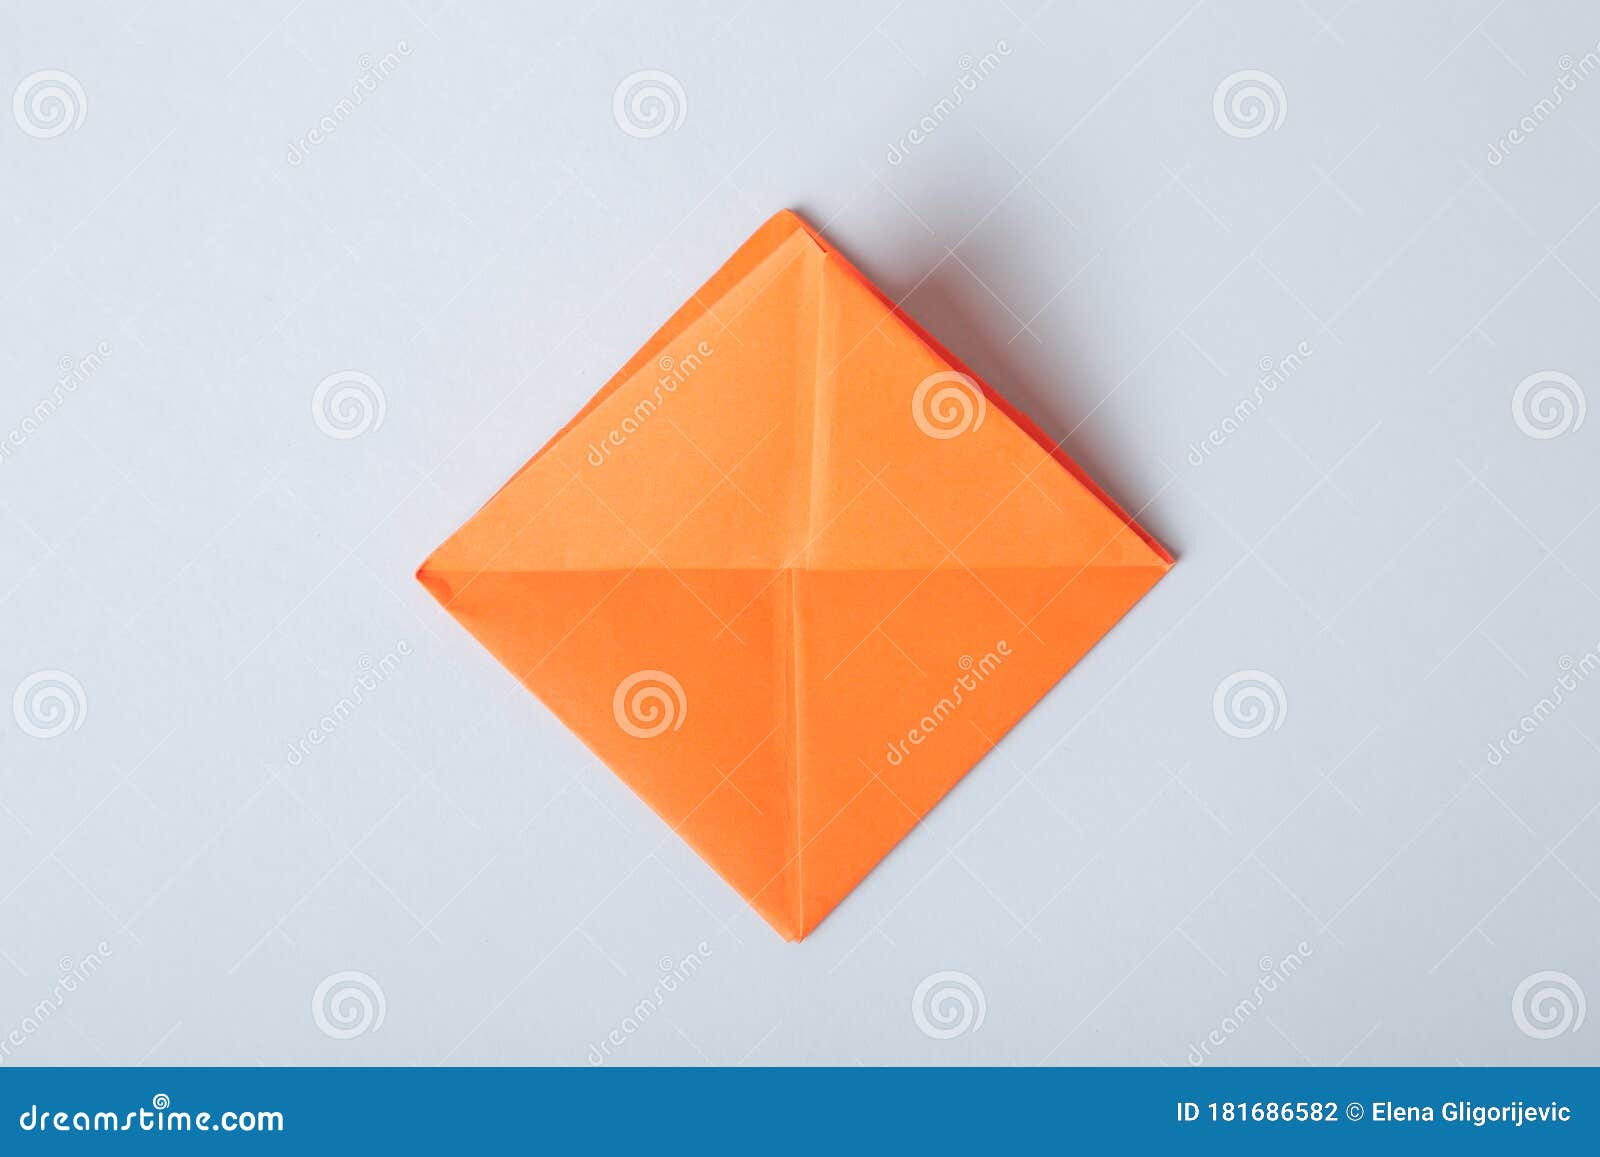 Step by Step Photo Instruction. How To Make Origami Paper Boat. DIY for